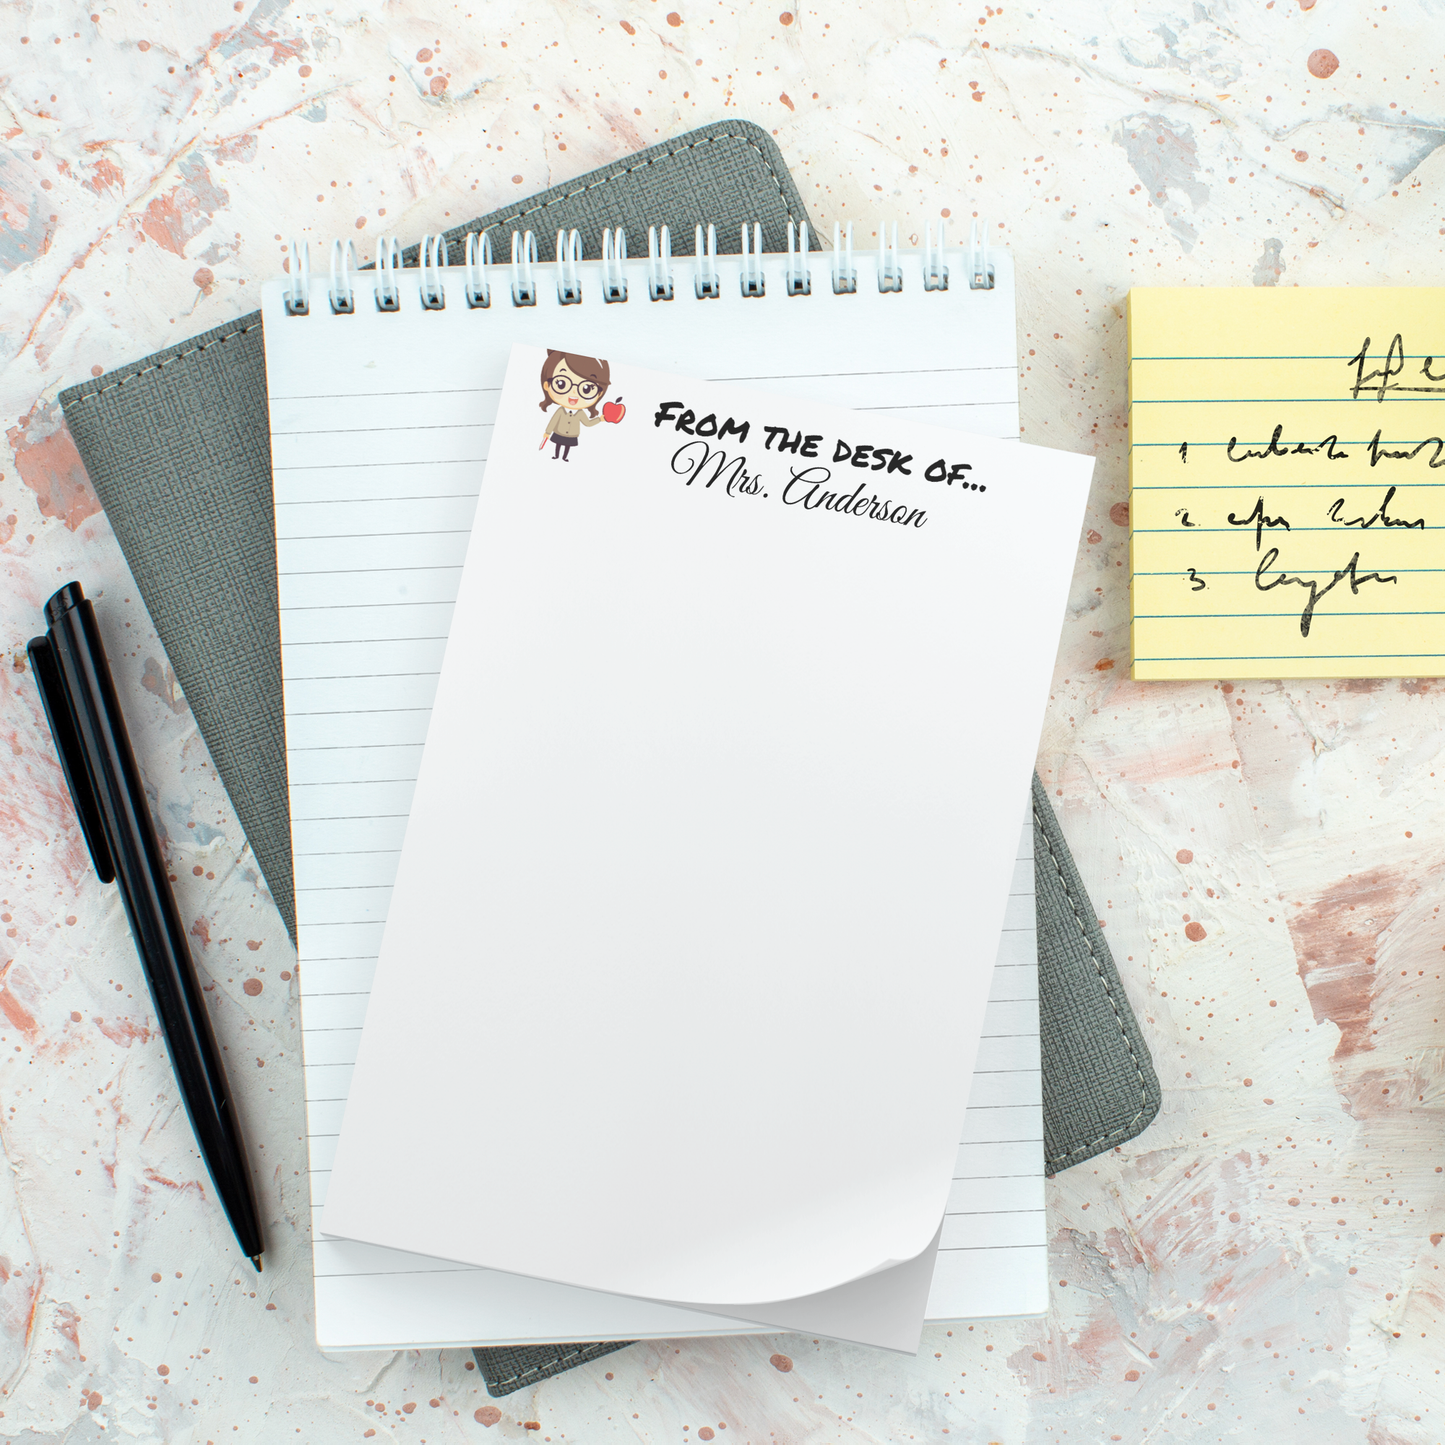 Get trendy with Personalized Post-It Notes for teachers (4x6) -  available at Good Gift Company. Grab yours for $10.50 today!